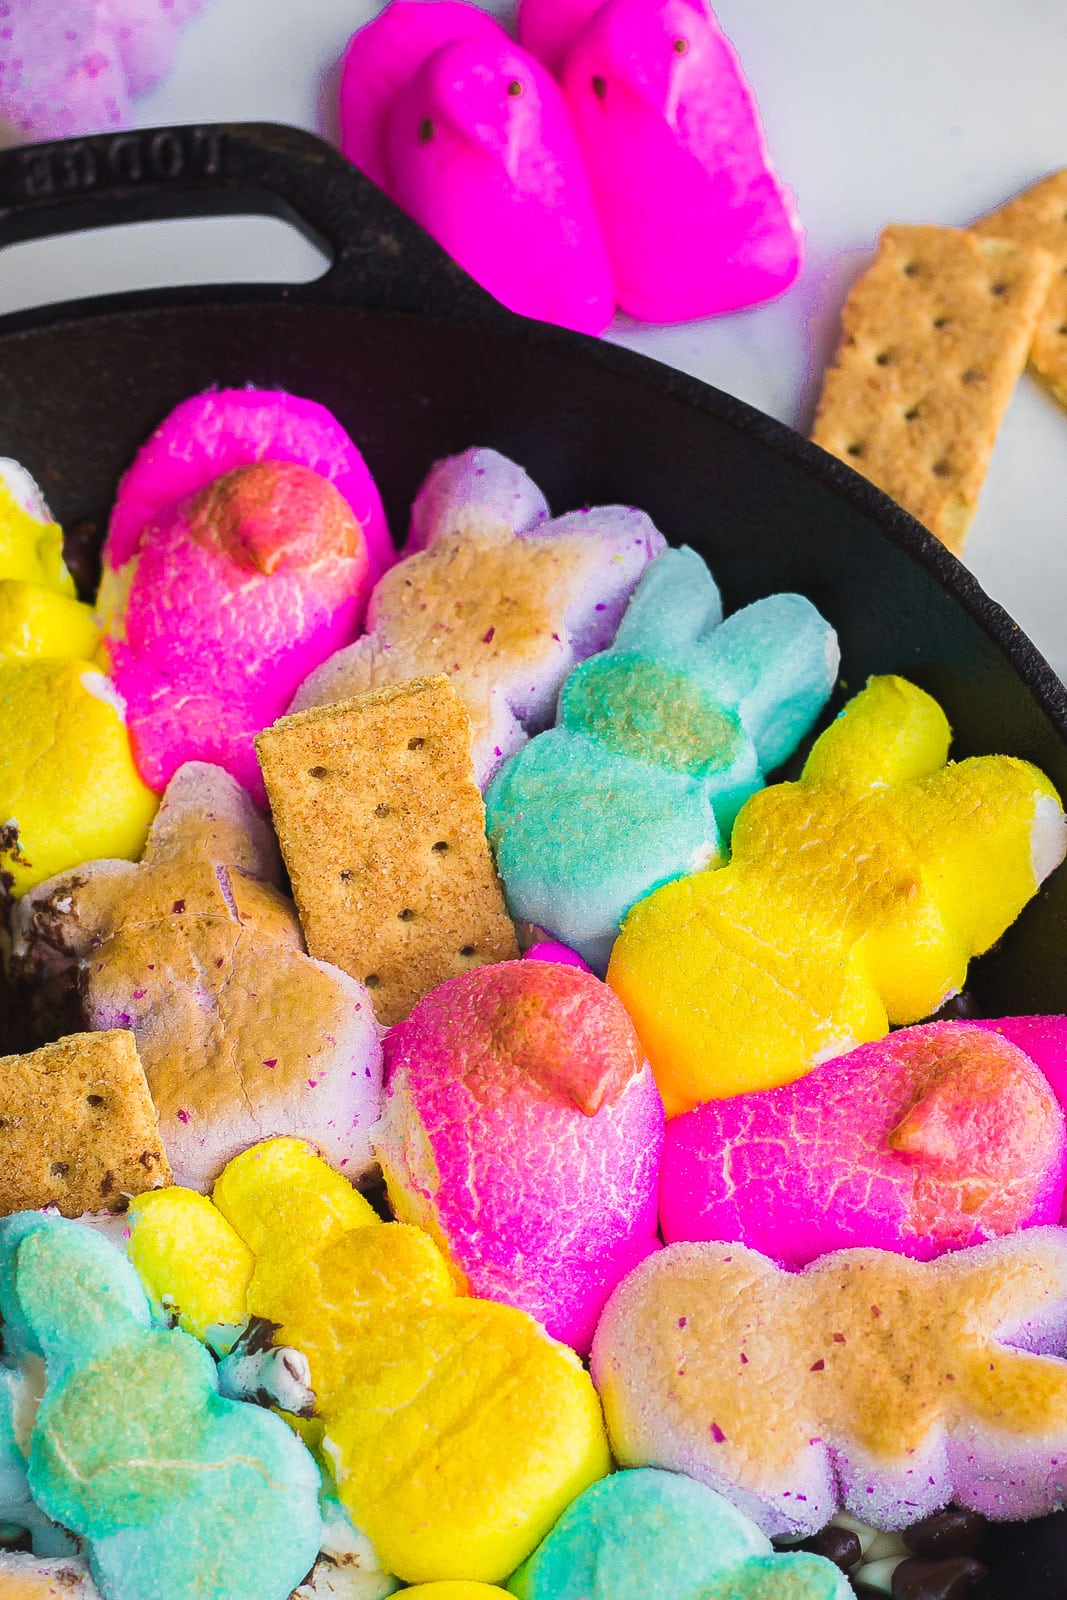 baked s'mores with peeps and graham crackers